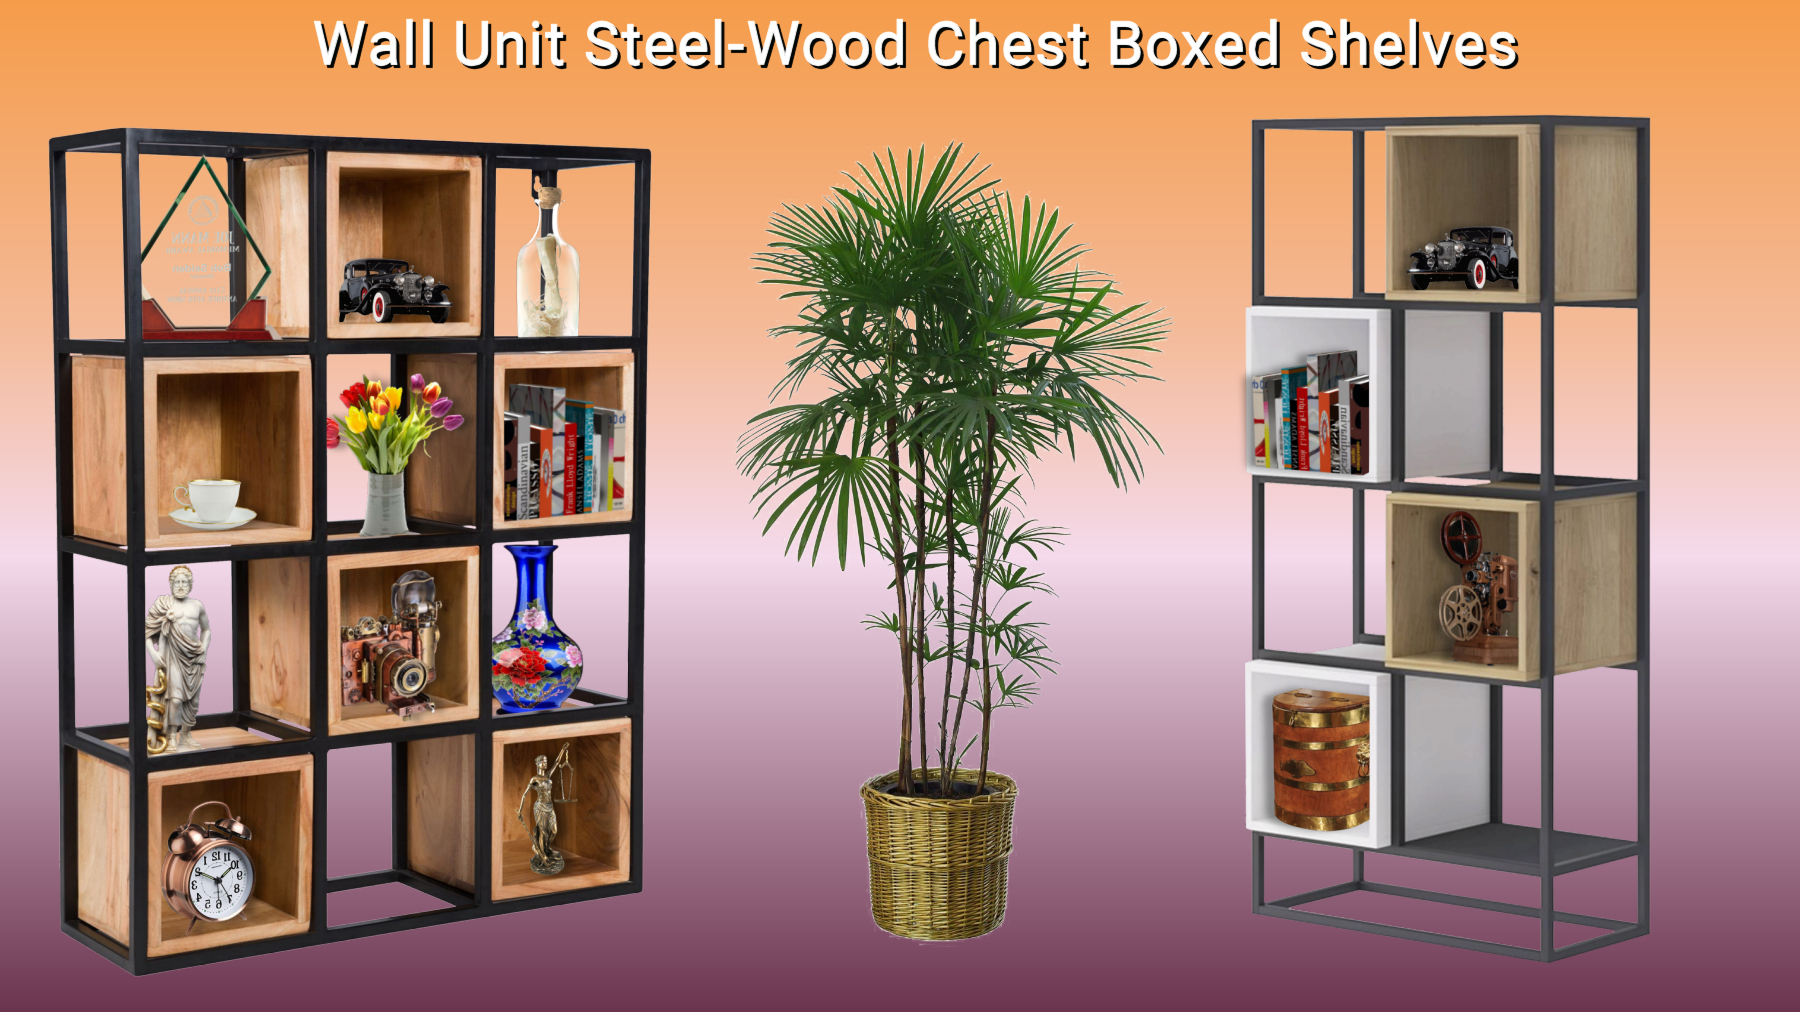 Wall Unit Steel-Wood Chest Boxed Shelves